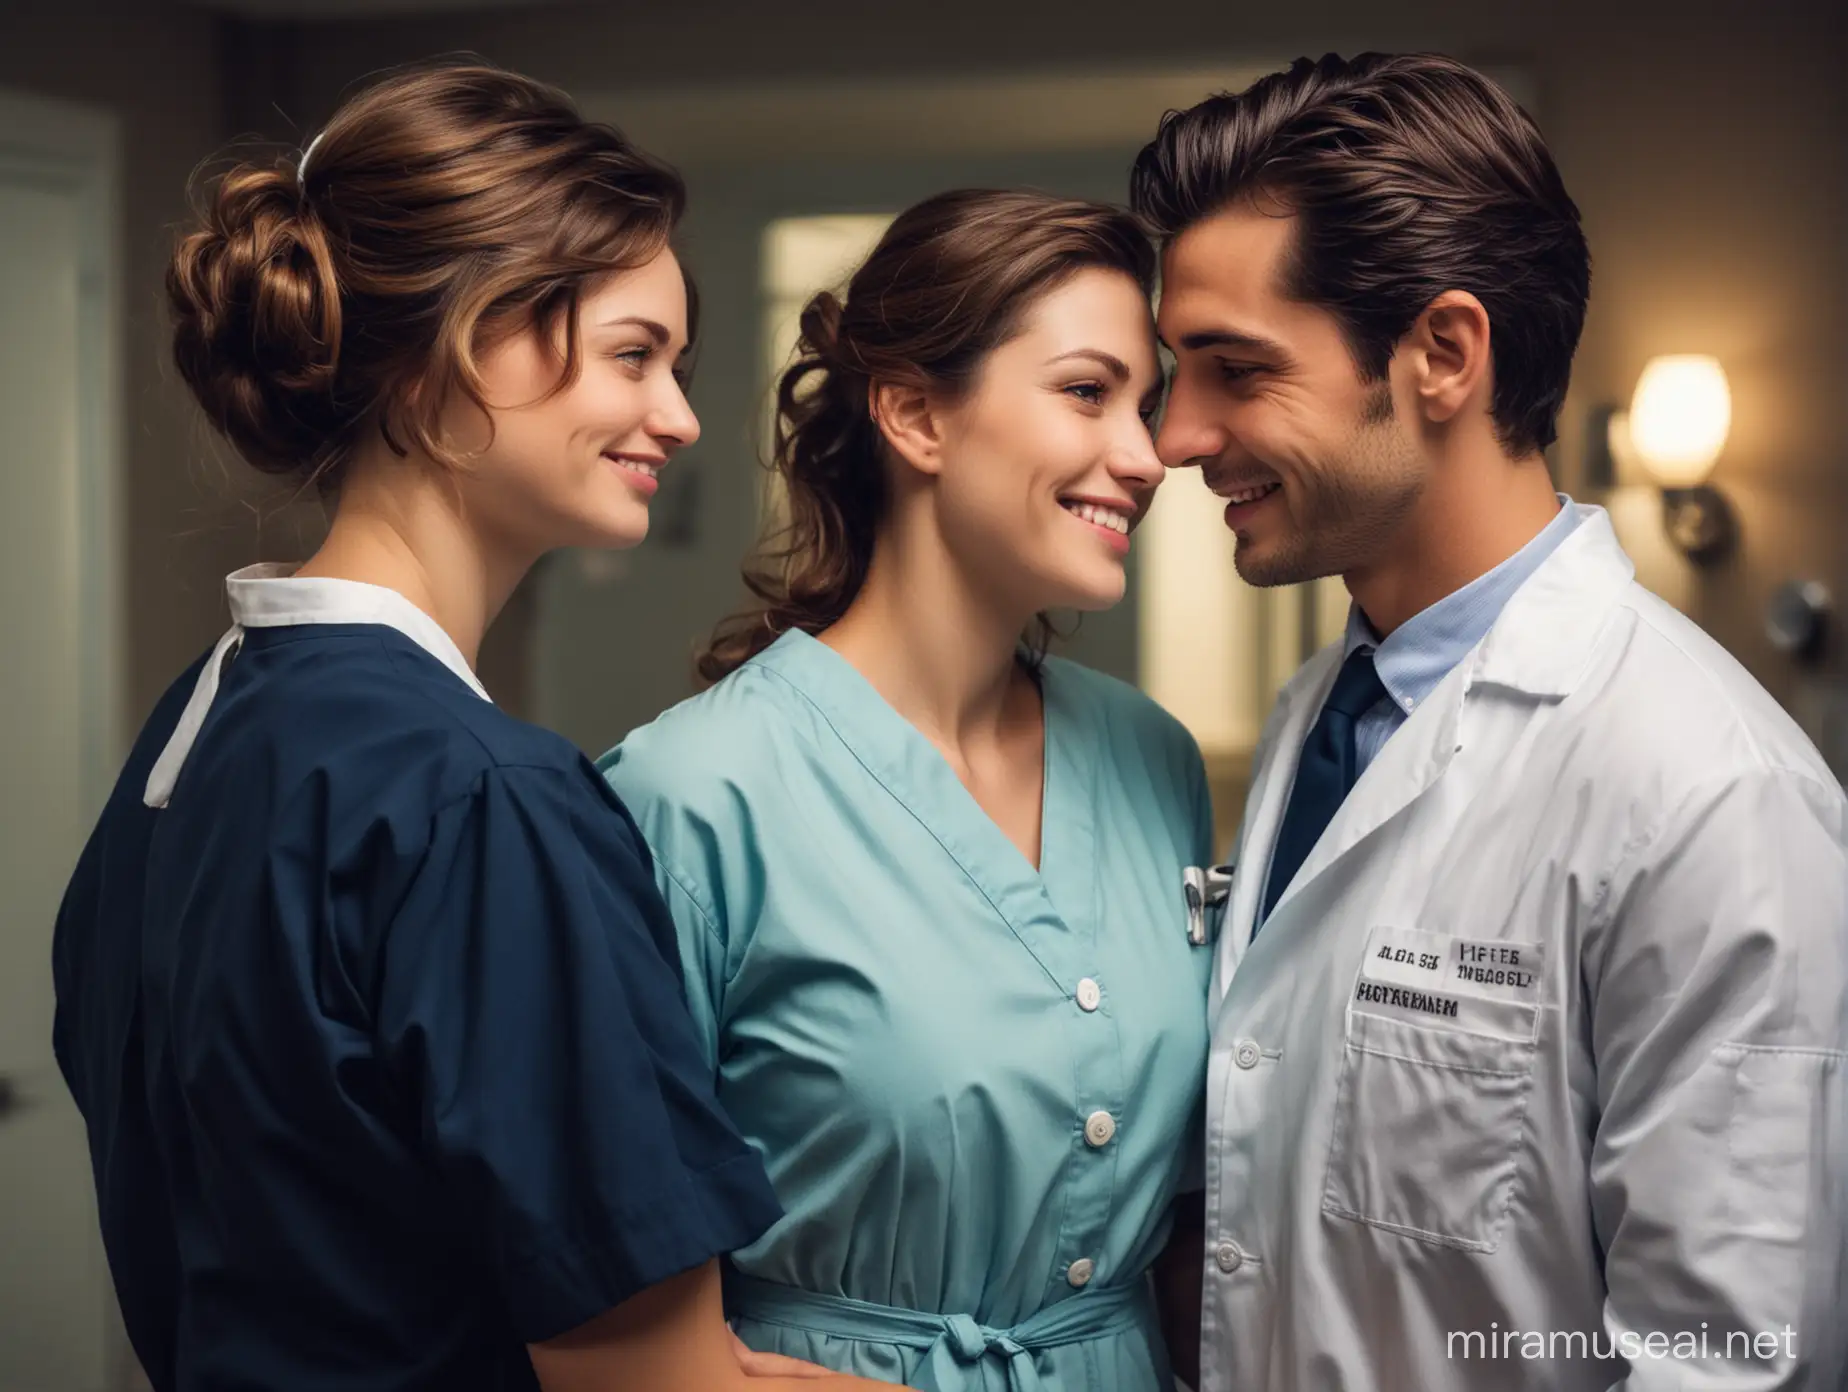 Endearing Night Shift Nurse and Doctor in Classic Uniforms Sharing a Moment